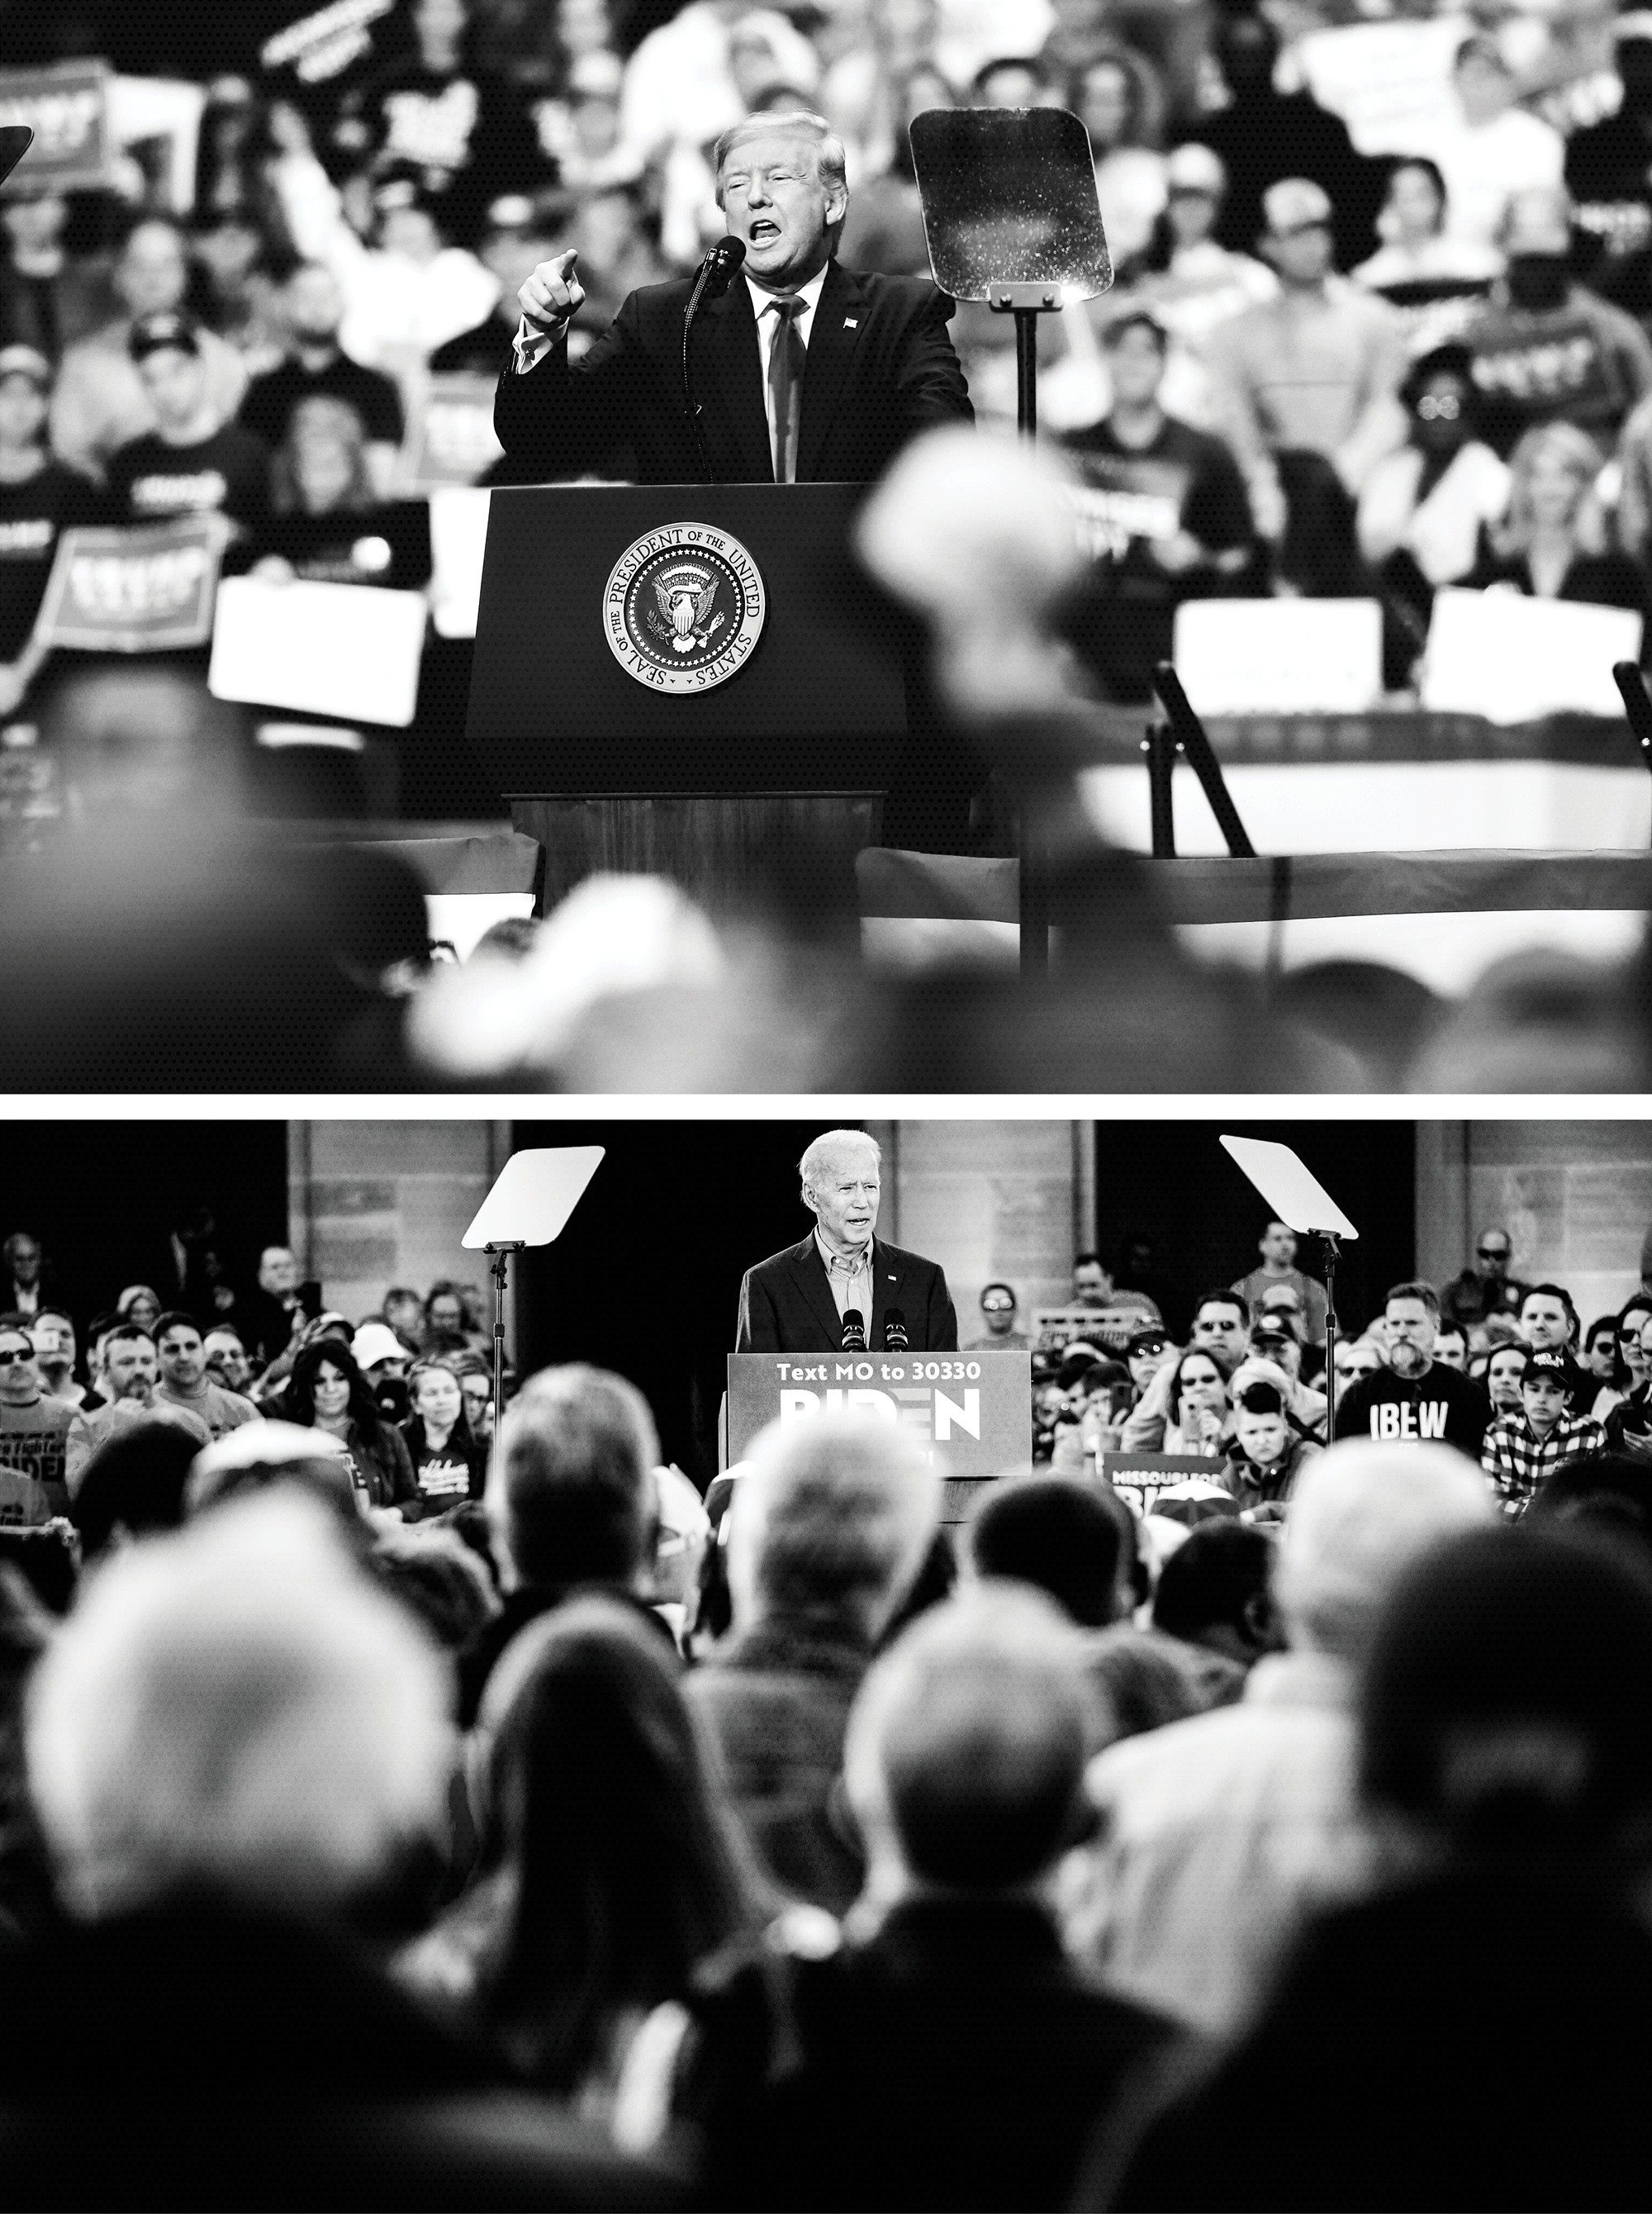 Photo collection of Donald Trump and Joe Biden campaigning